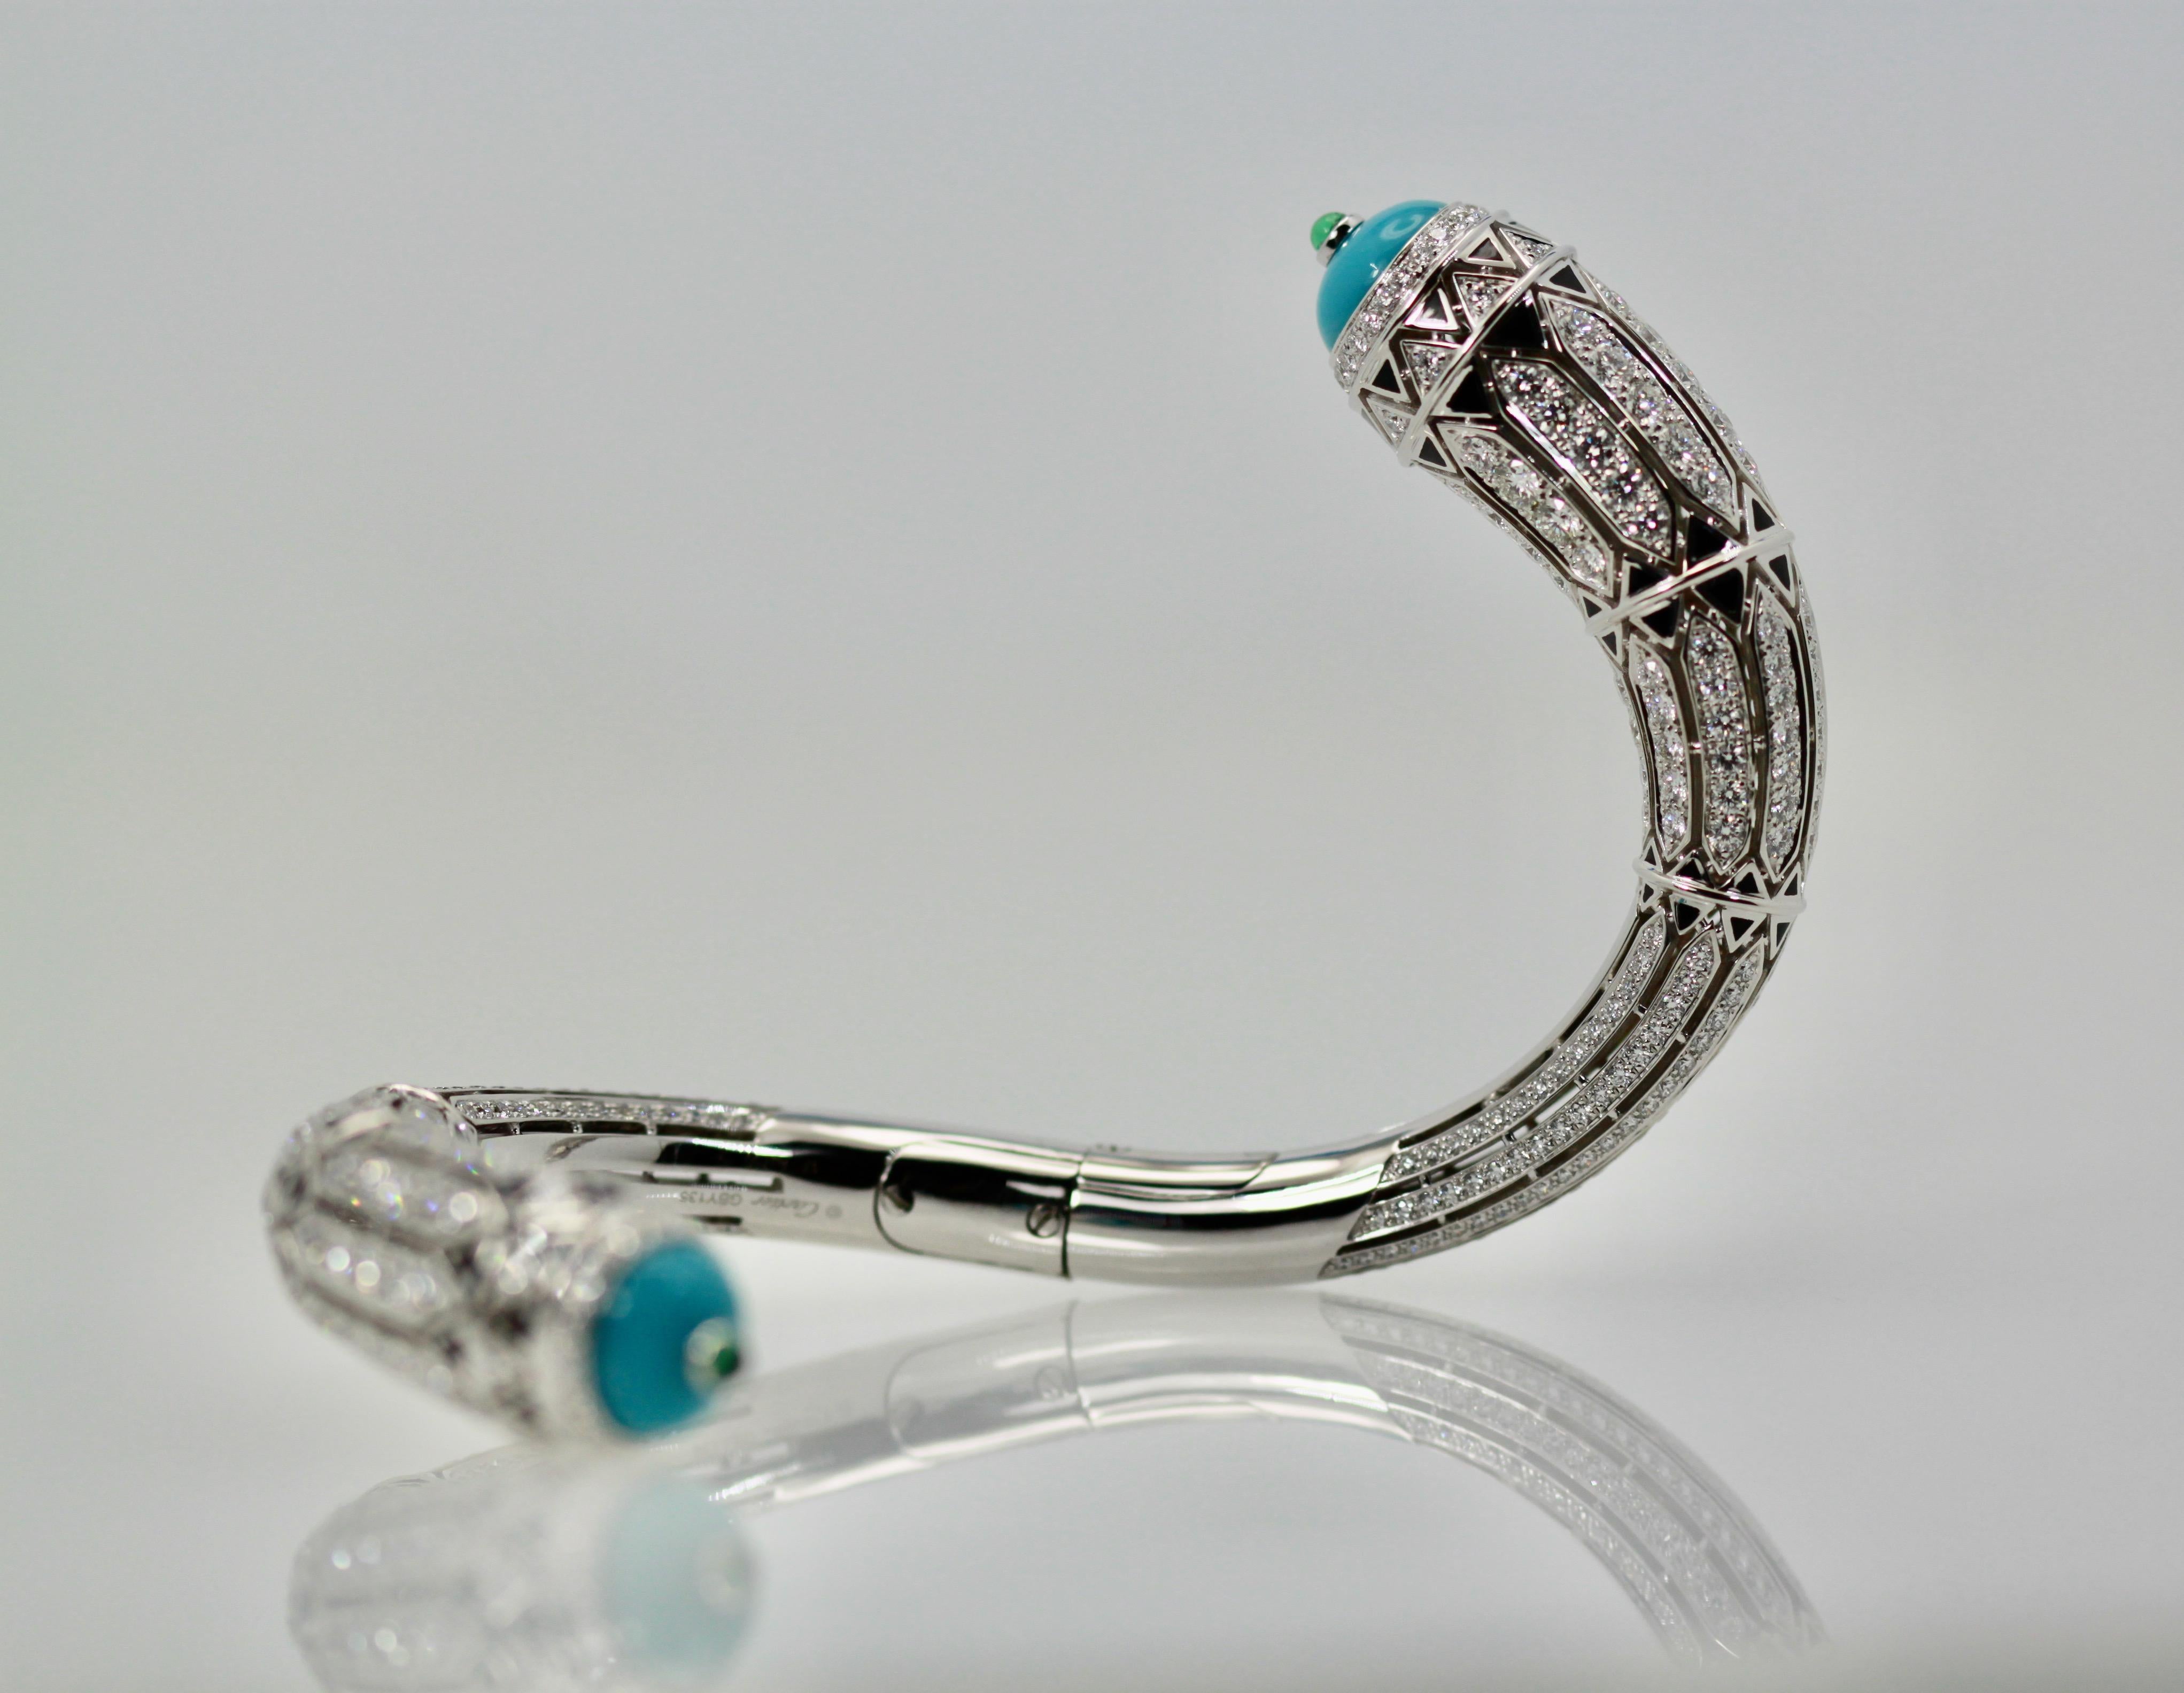 Round Cut Cartier High Jewelry Diamond Turquoise Bracelet Deco Inspired 12.73 Carat For Sale